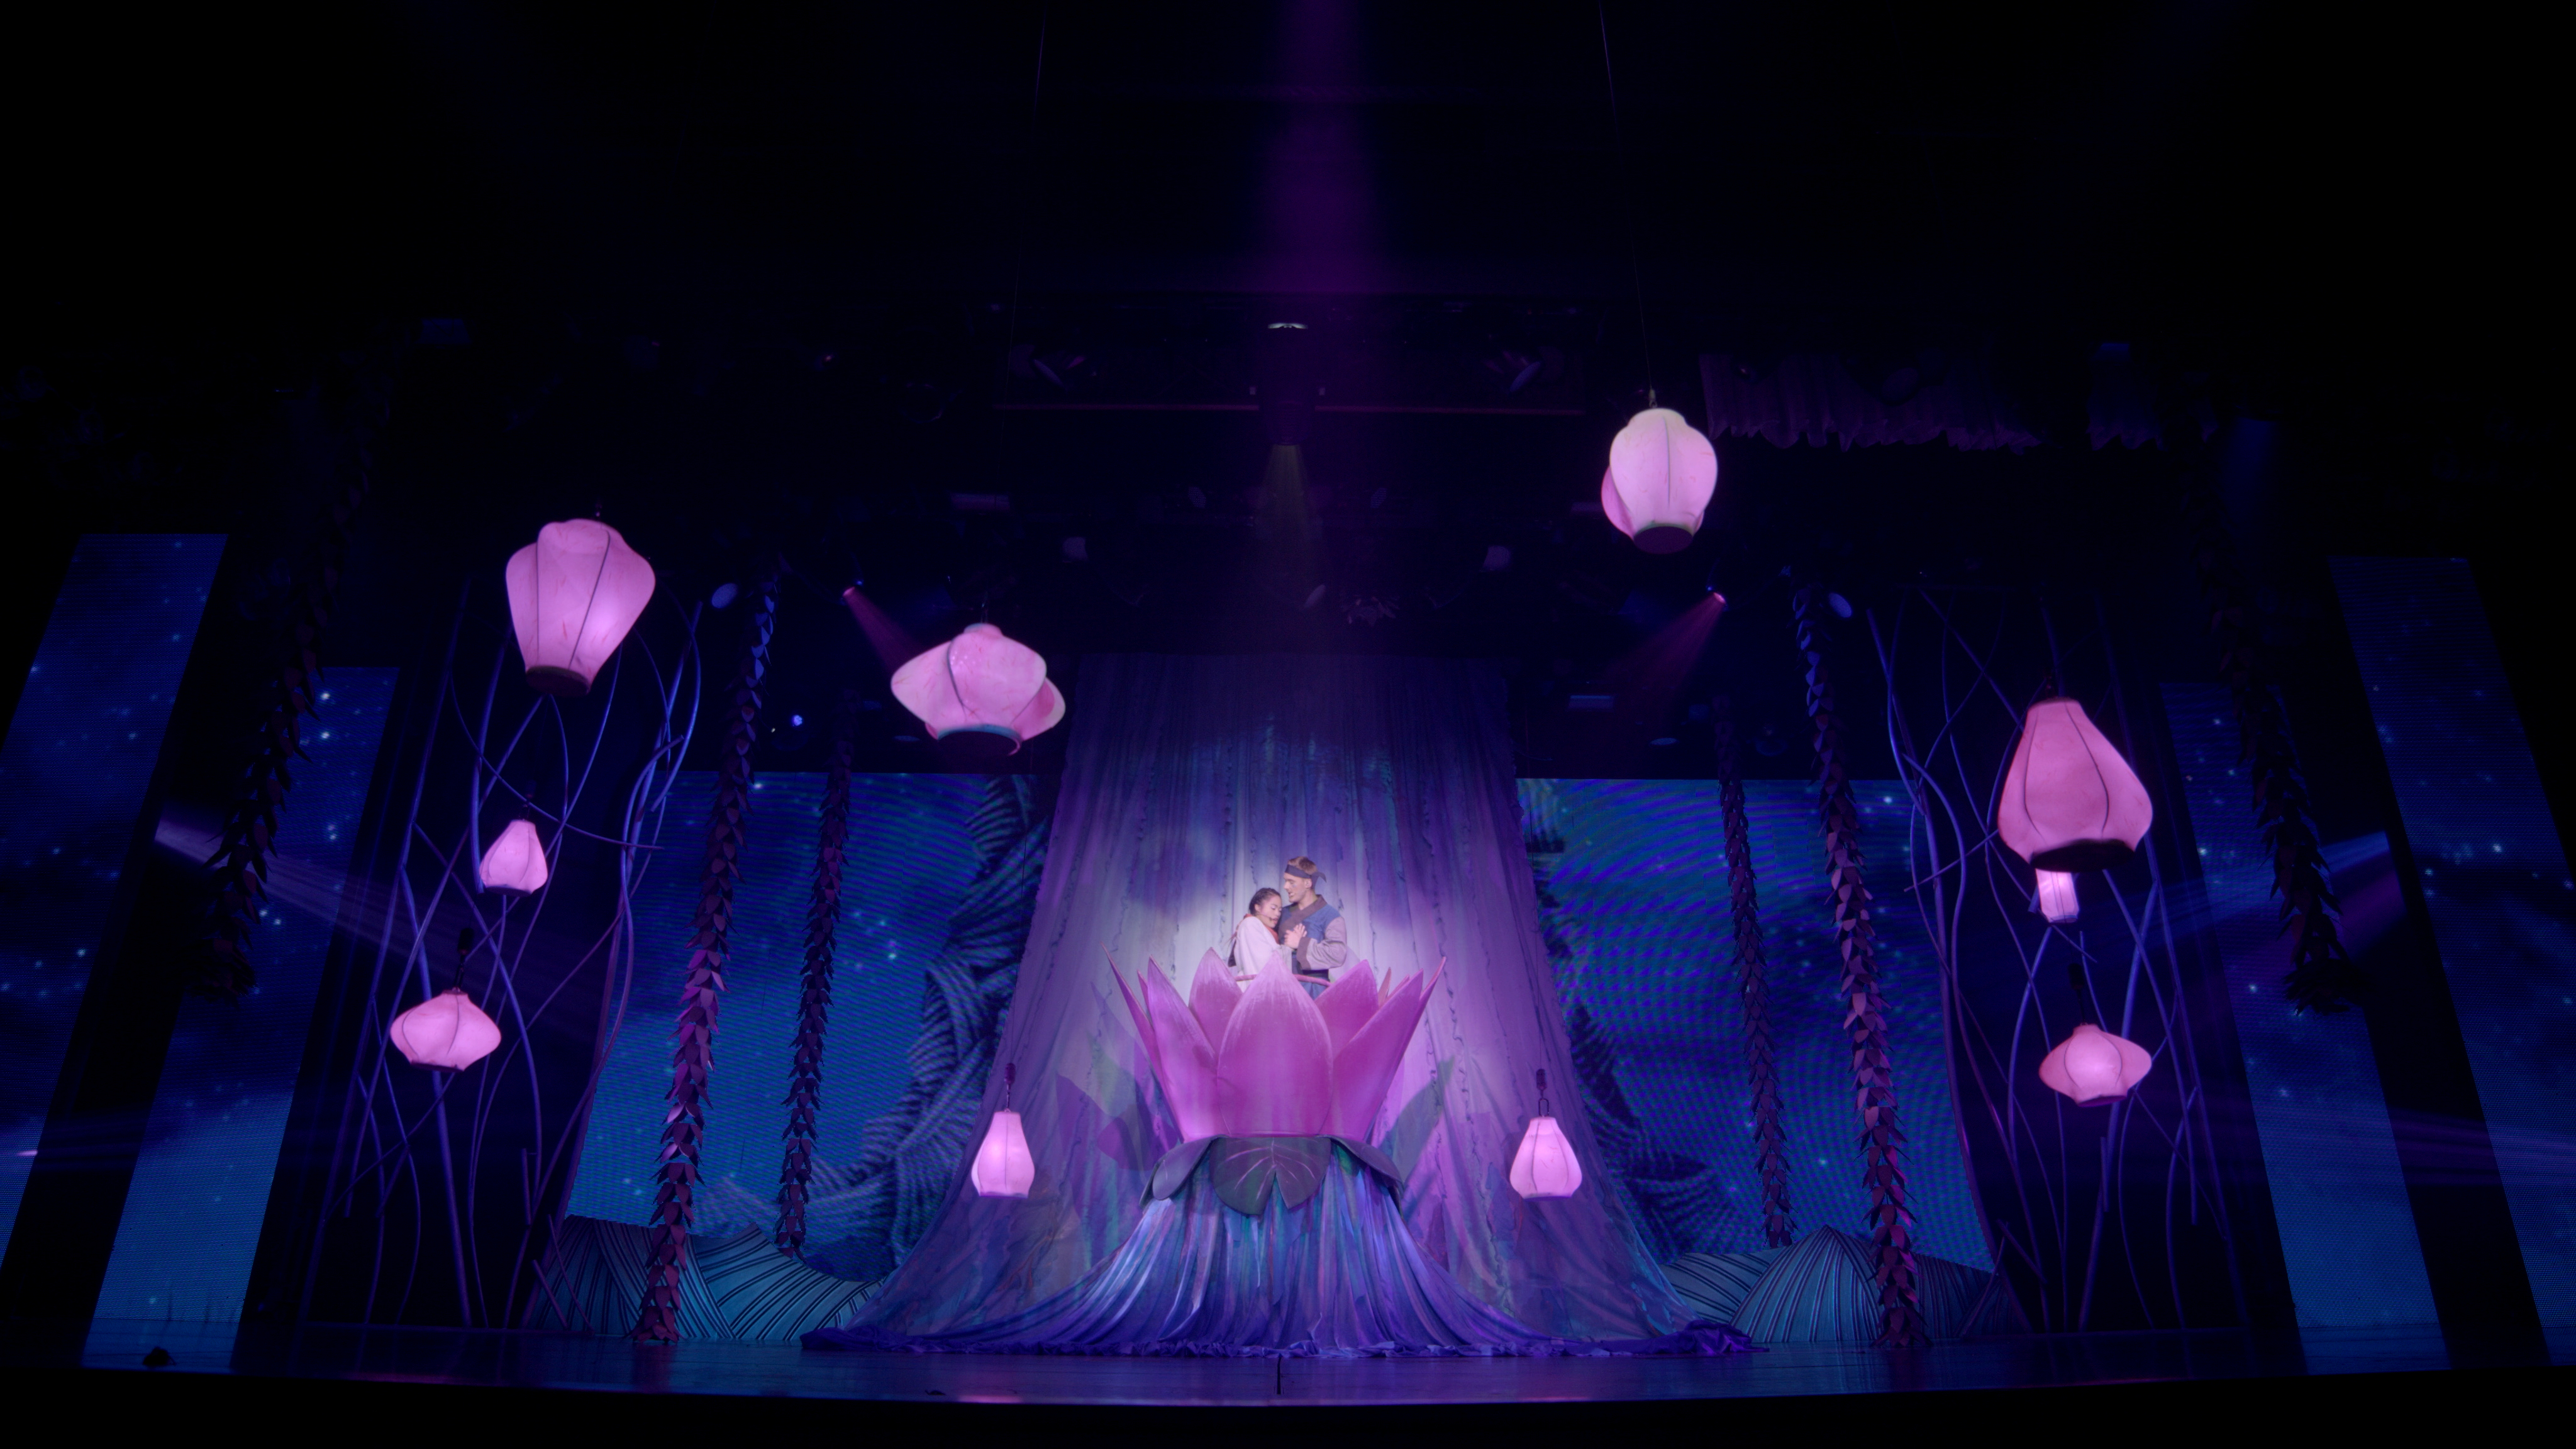 HARMAN Professional Solutions Helps Bring “The Secret Silk” To Life On Princess Cruises